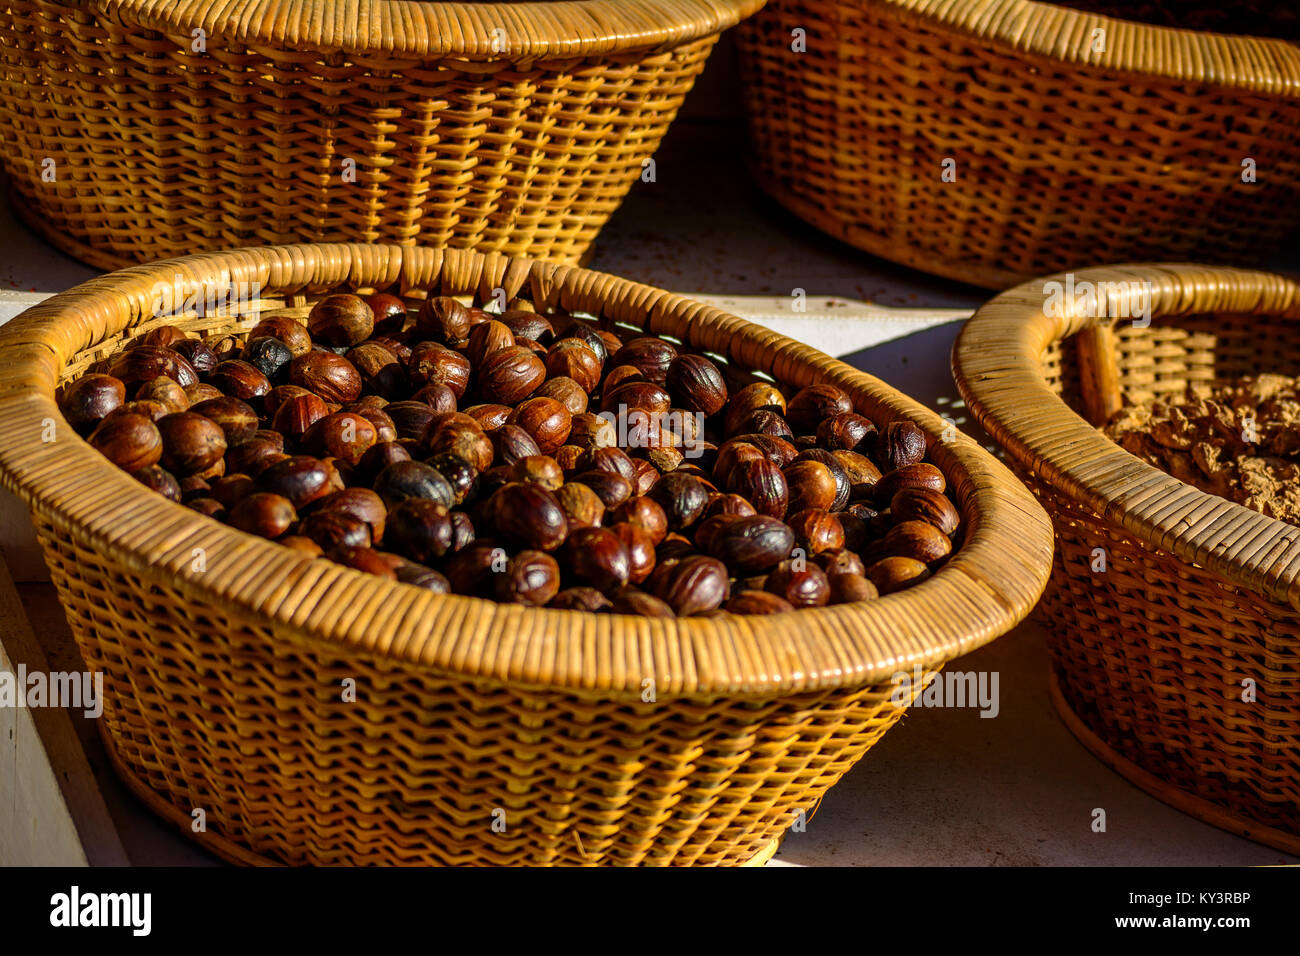 Kerala Spices in traditional bamboo basket Stock Photo